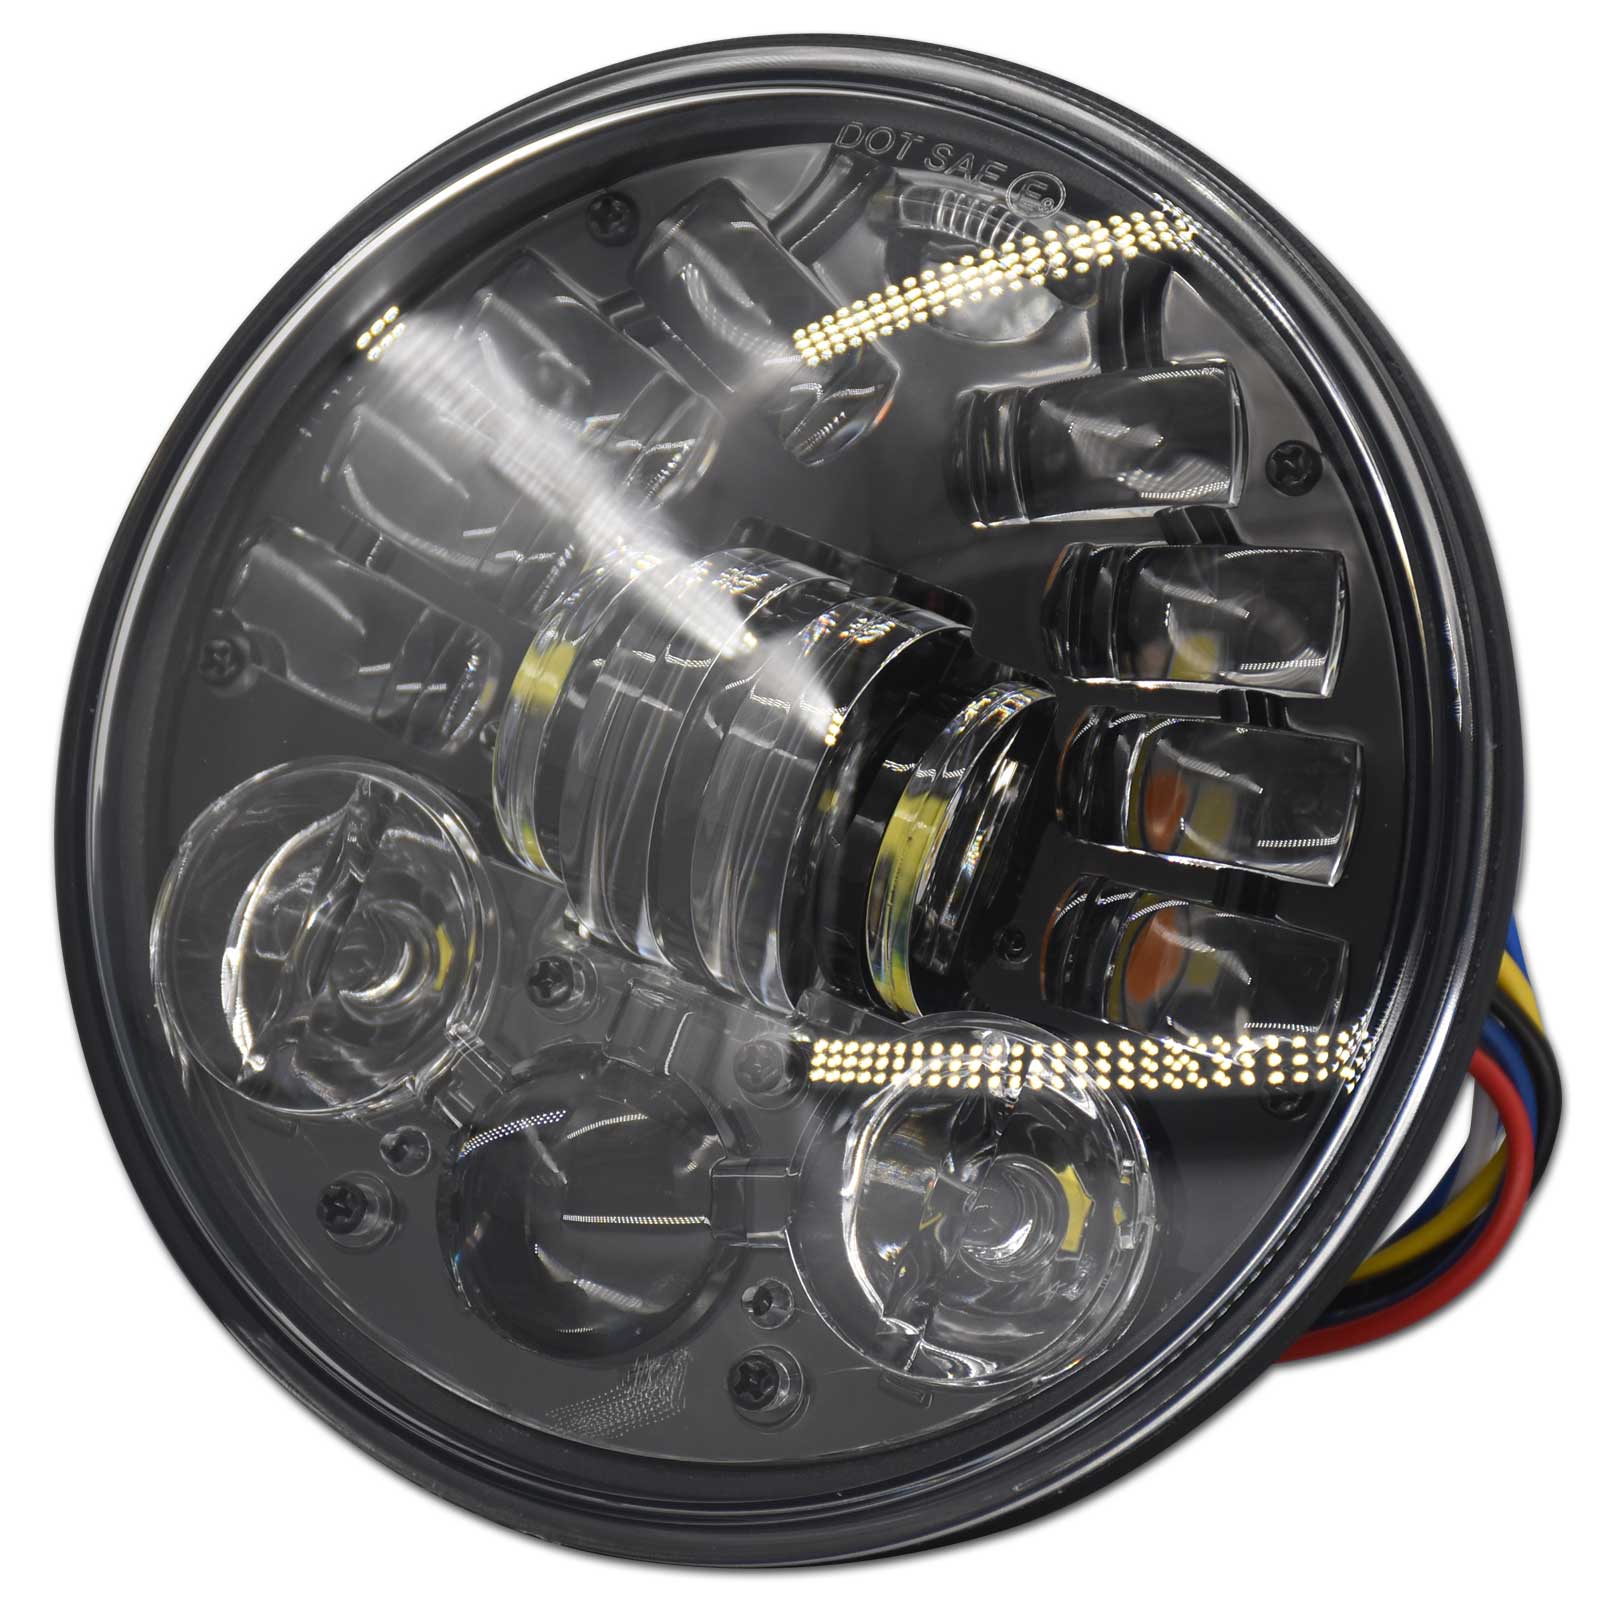 5.75'' Motorcycle Led Headlight With Turn Light & DRL